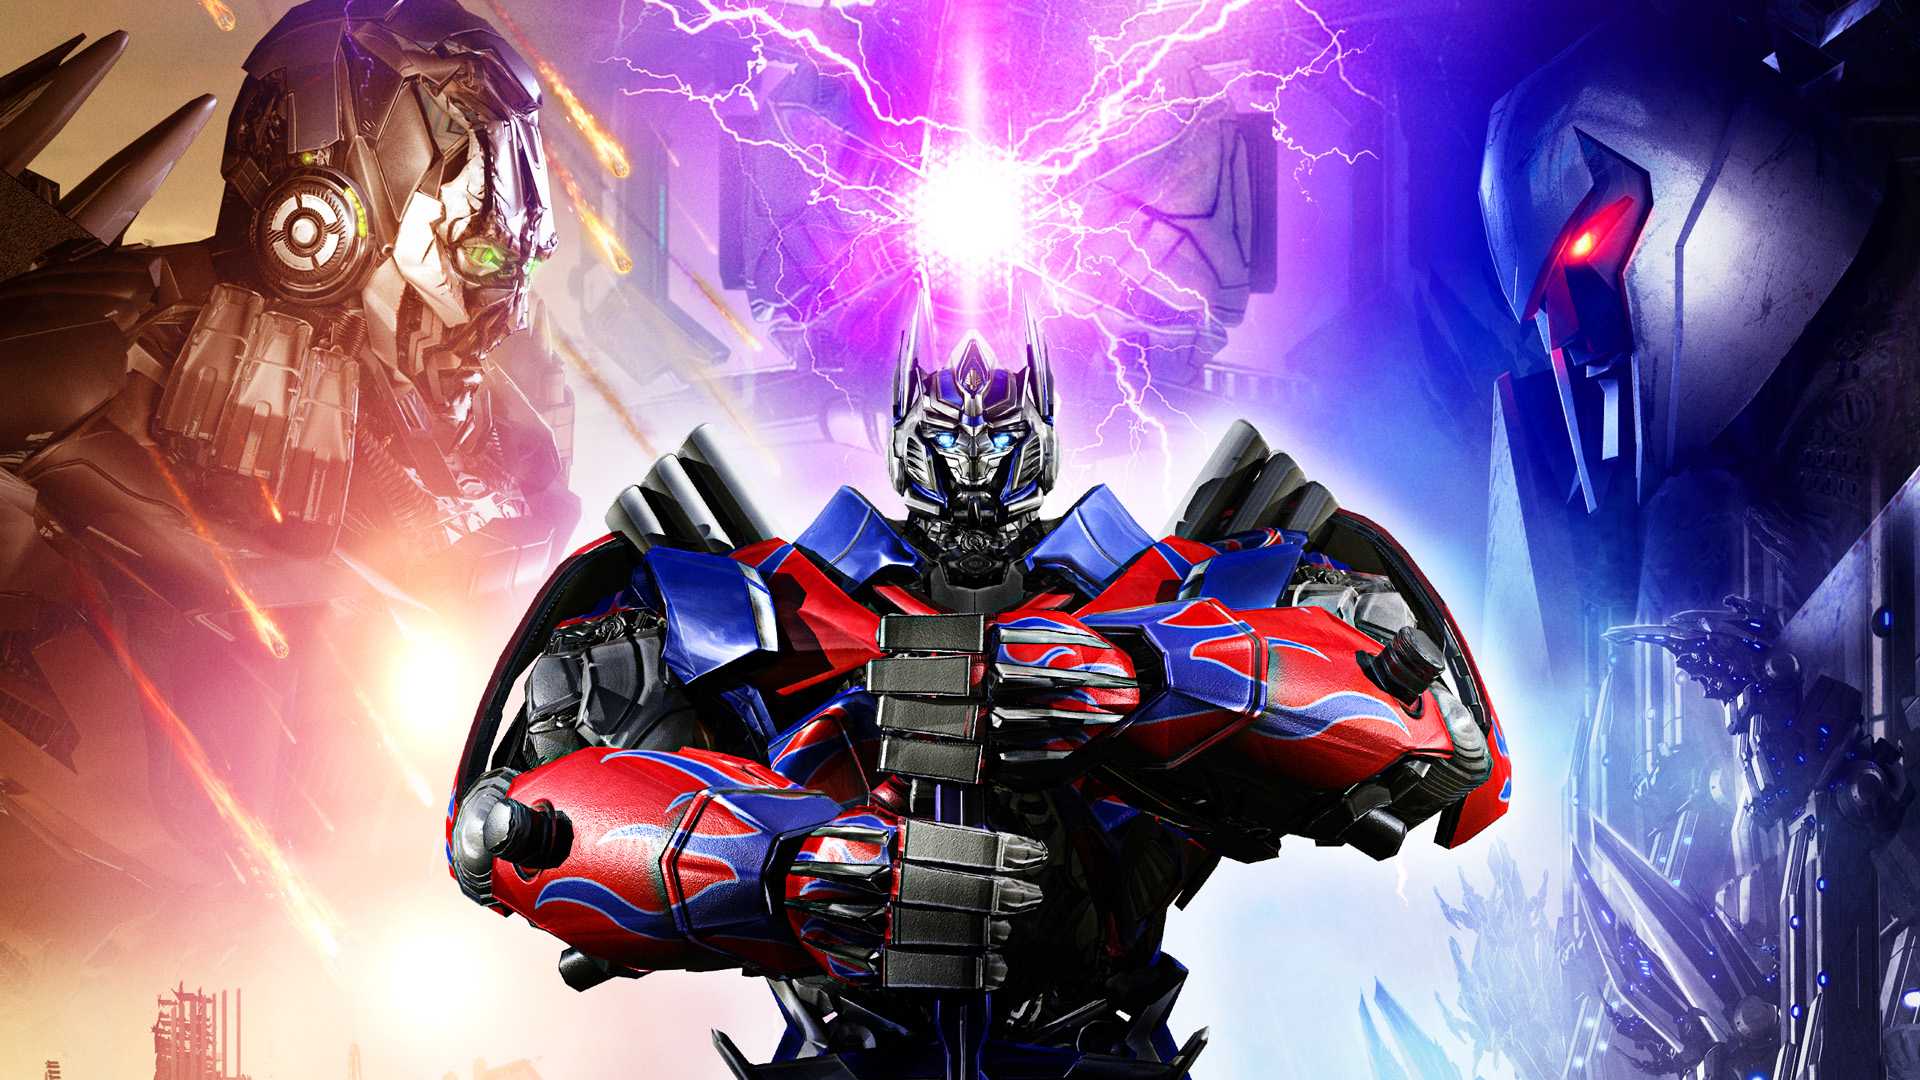 Transformers rise of the dark spark steam фото 1